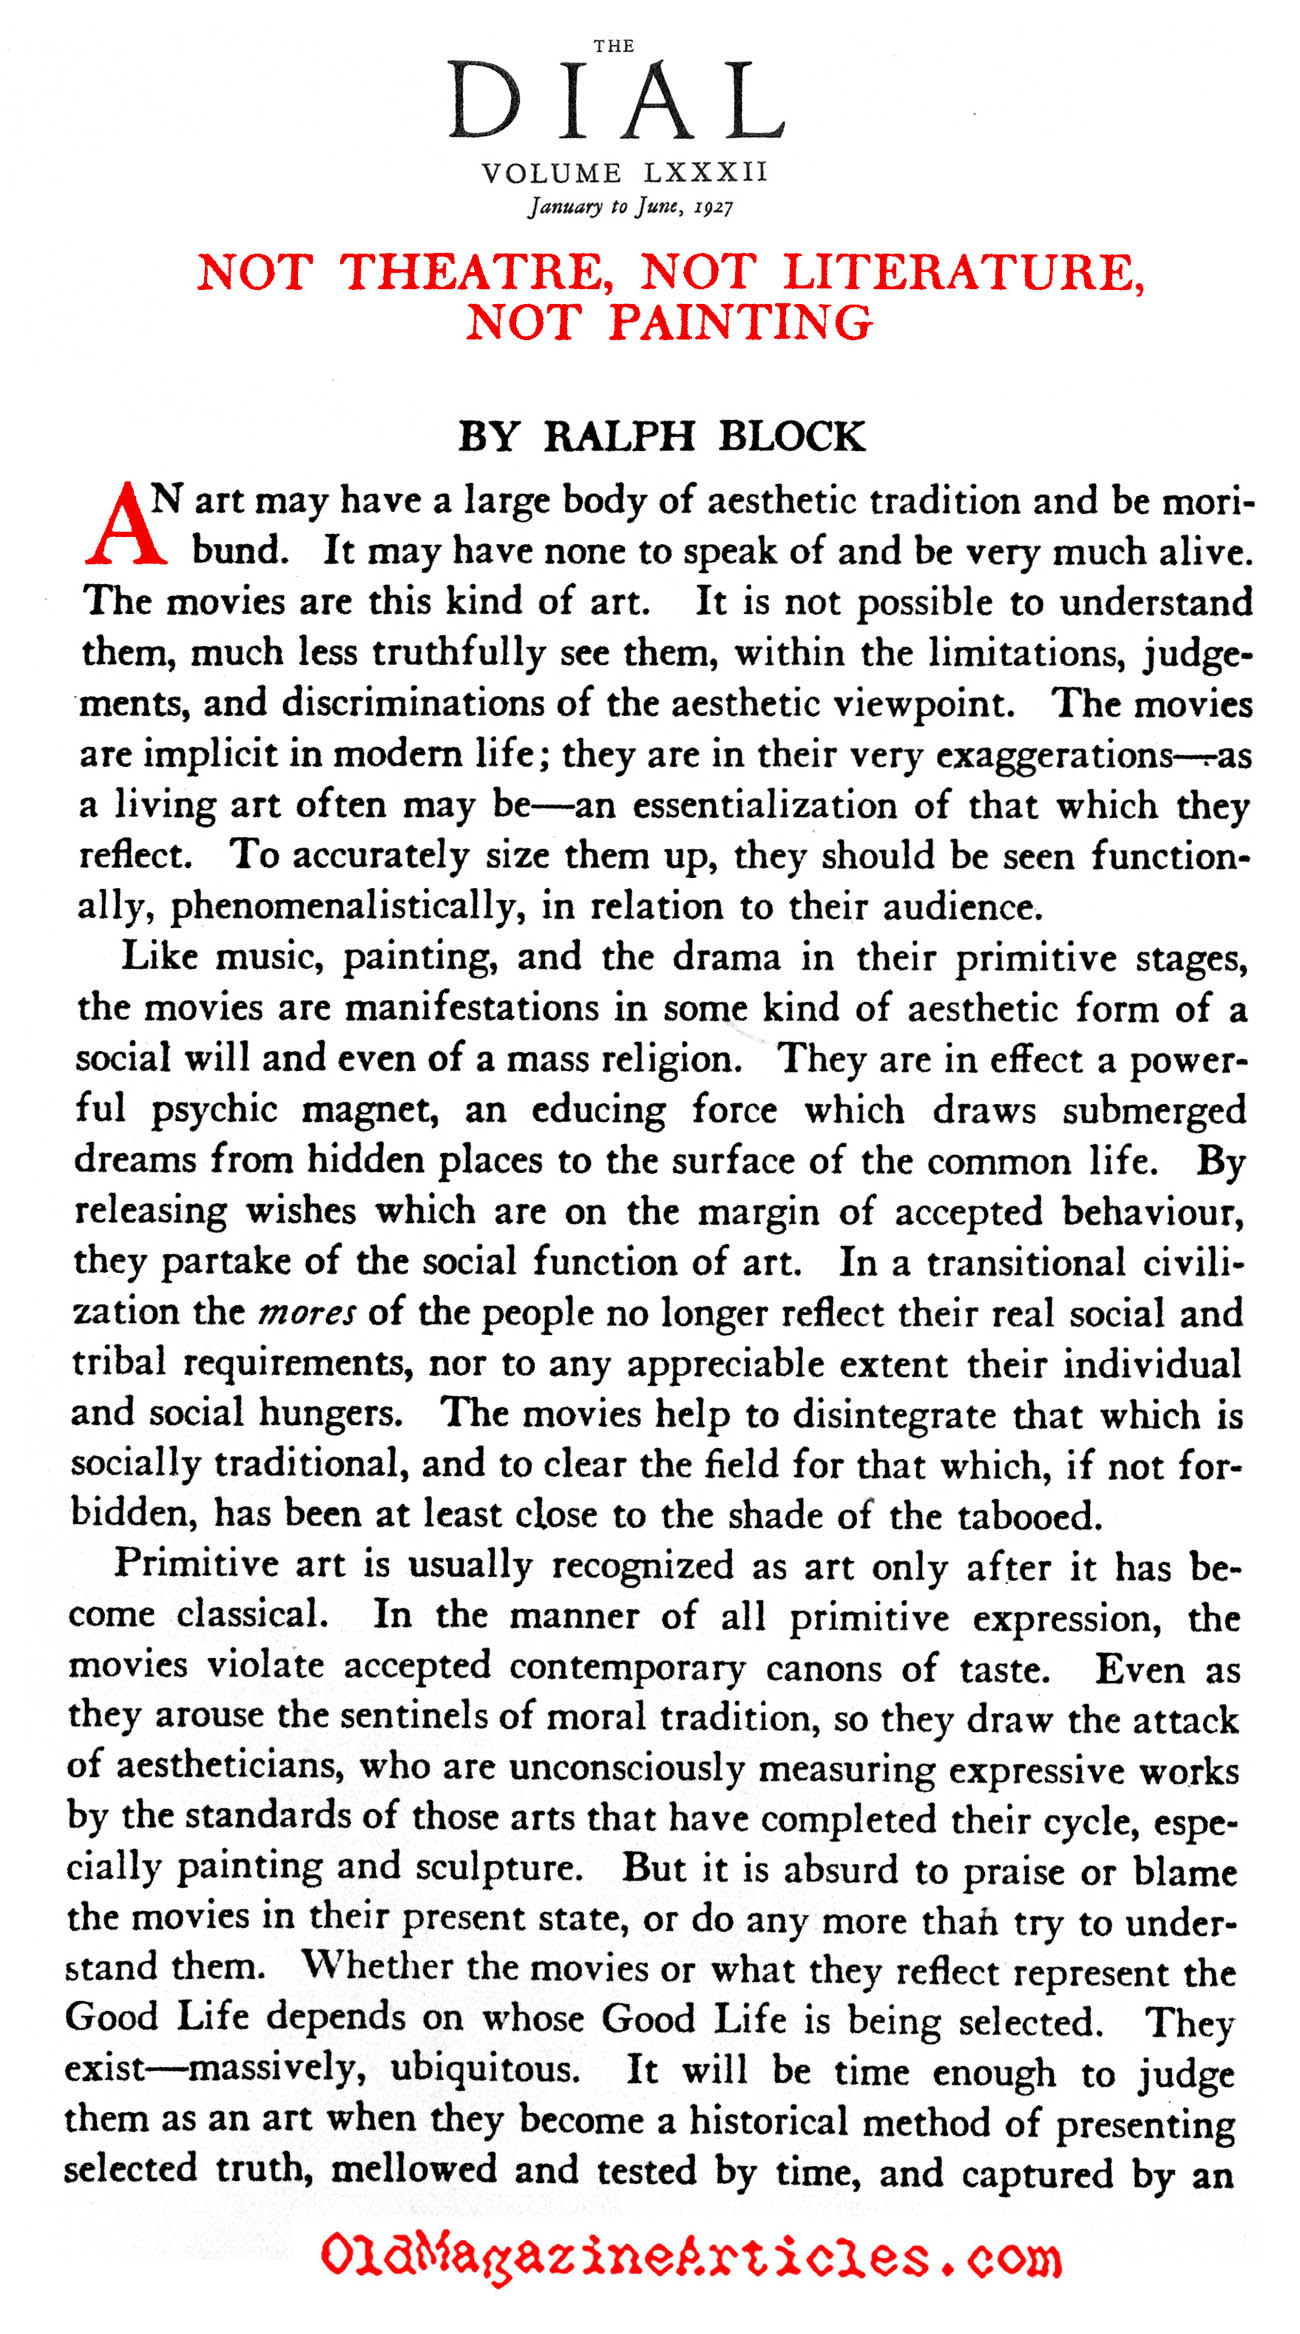 ''Film Cannot Be Art'' (The Dial Magazine, 1927)